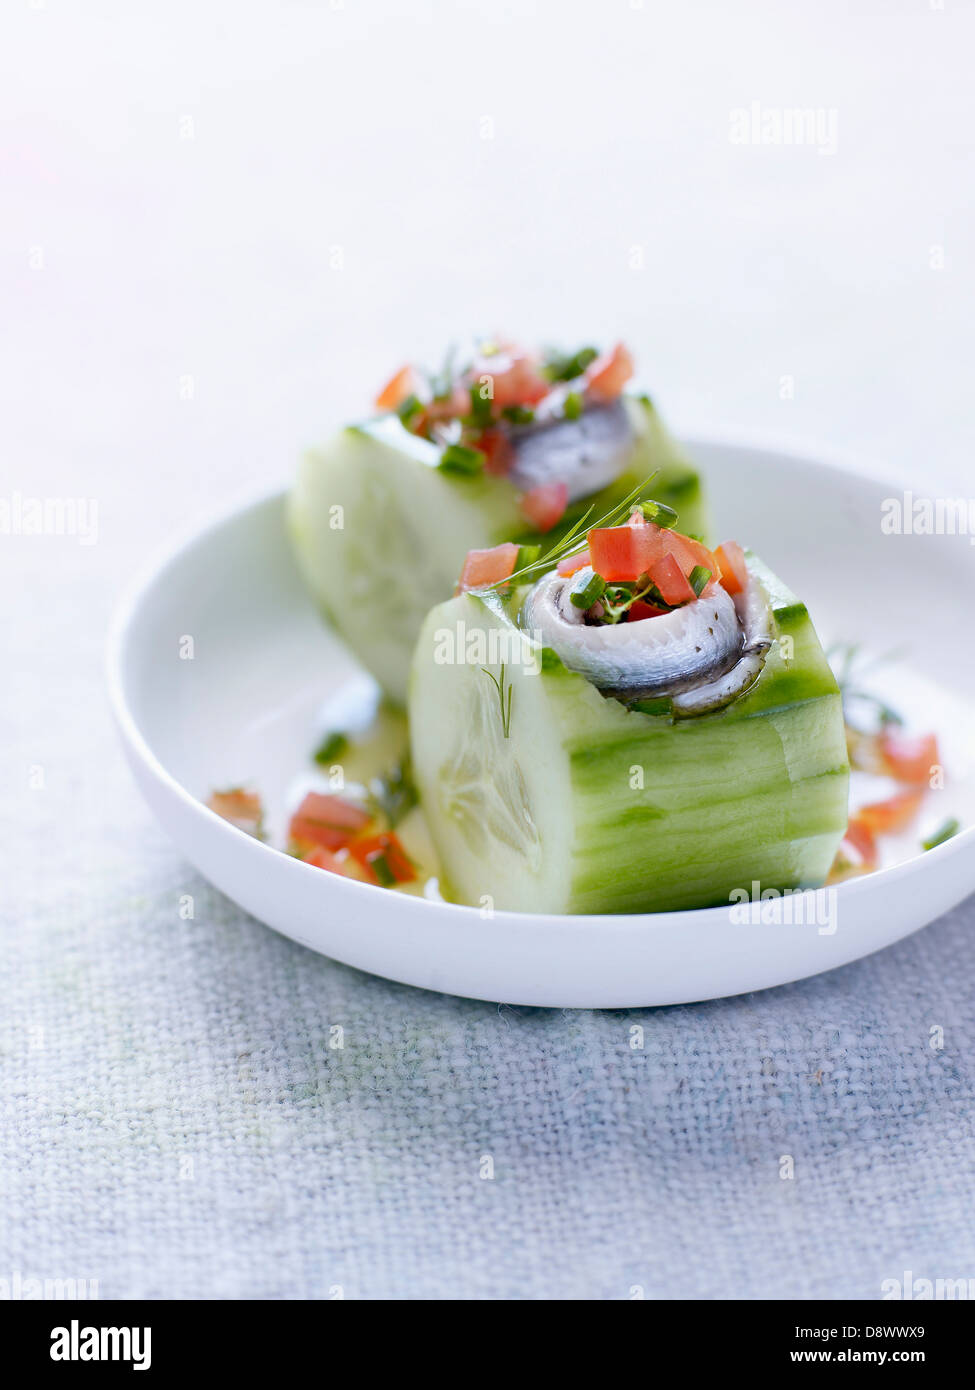 Cucumber with anchovies and diced tomatoes Stock Photo